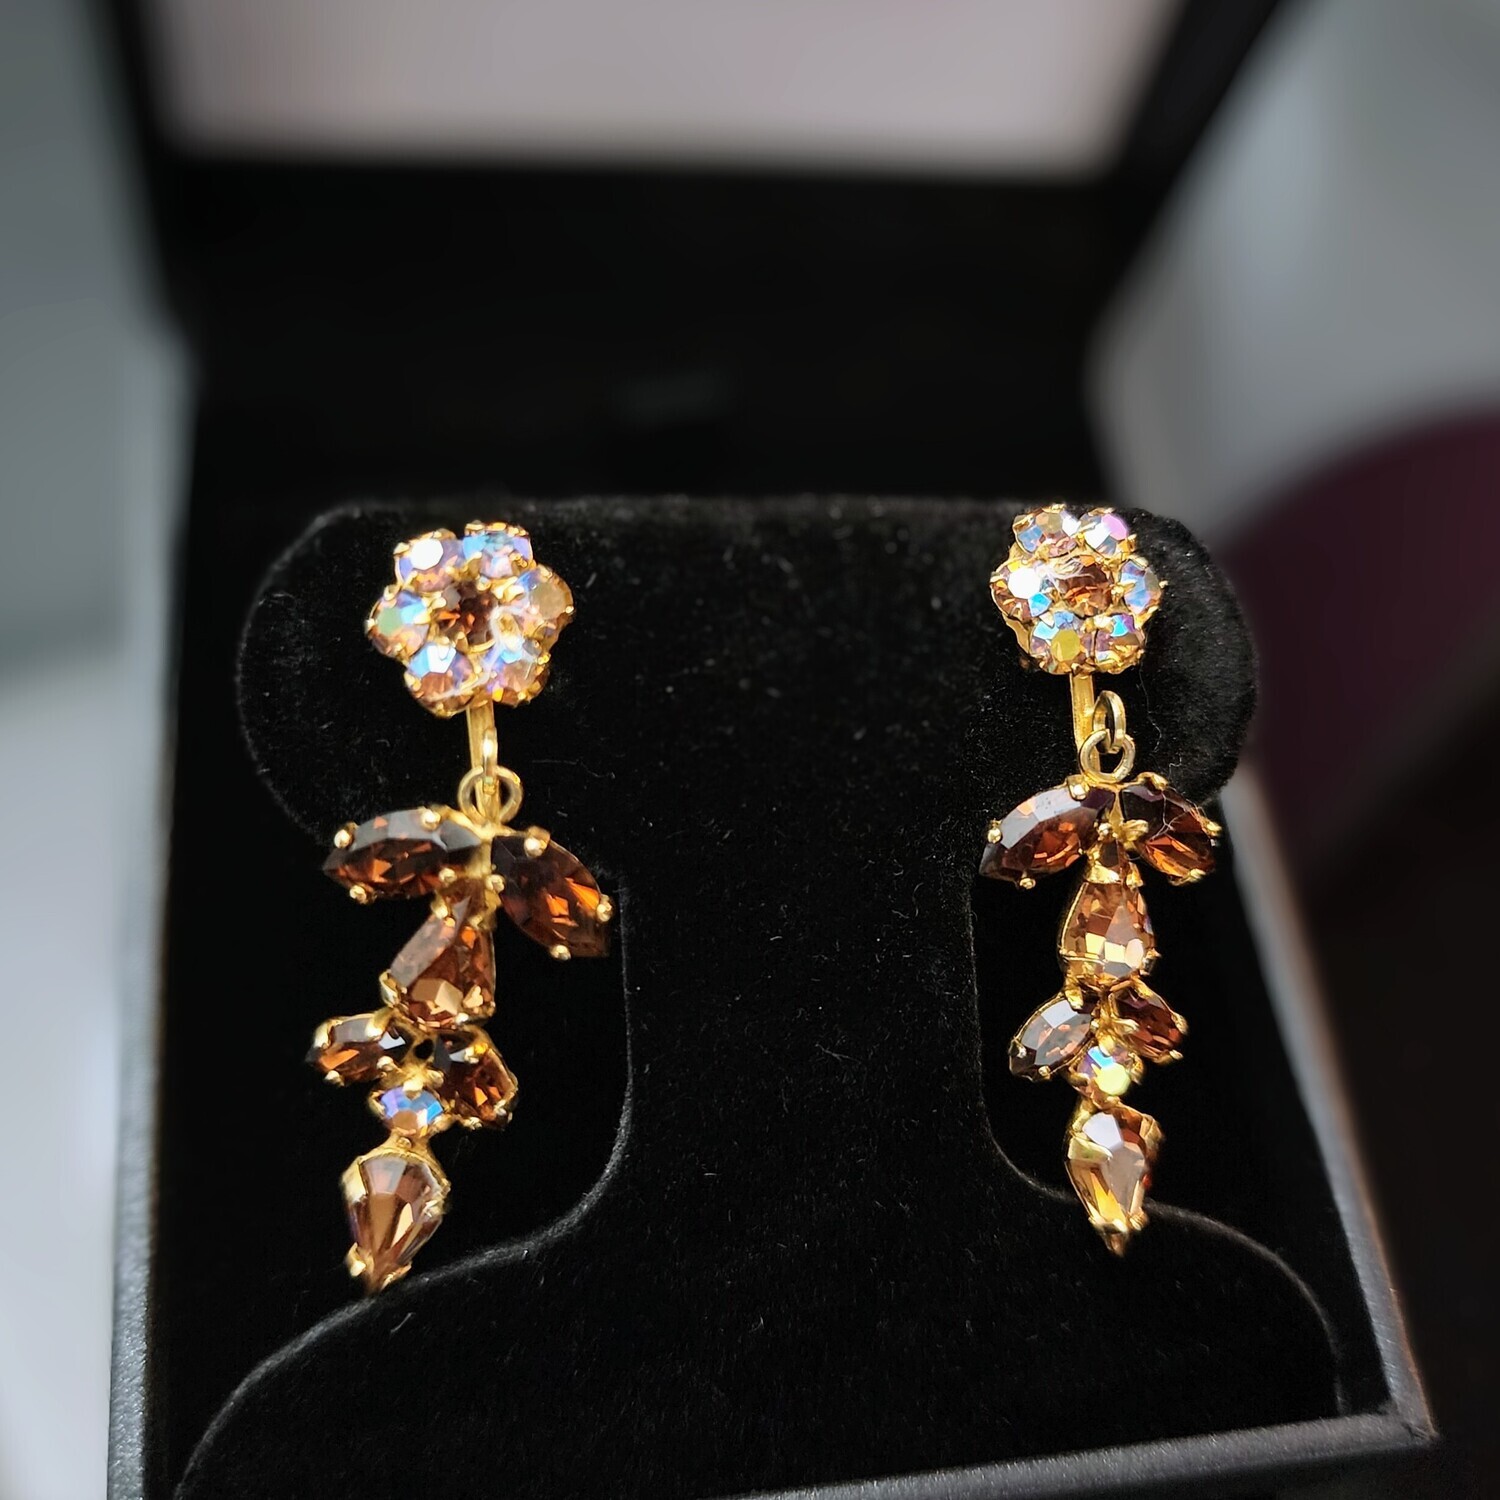 Sherman's Floral Amber Gold Clip-On Earrings with Aurora Borealis Crystal  and Swarovski Stone c. 1960's